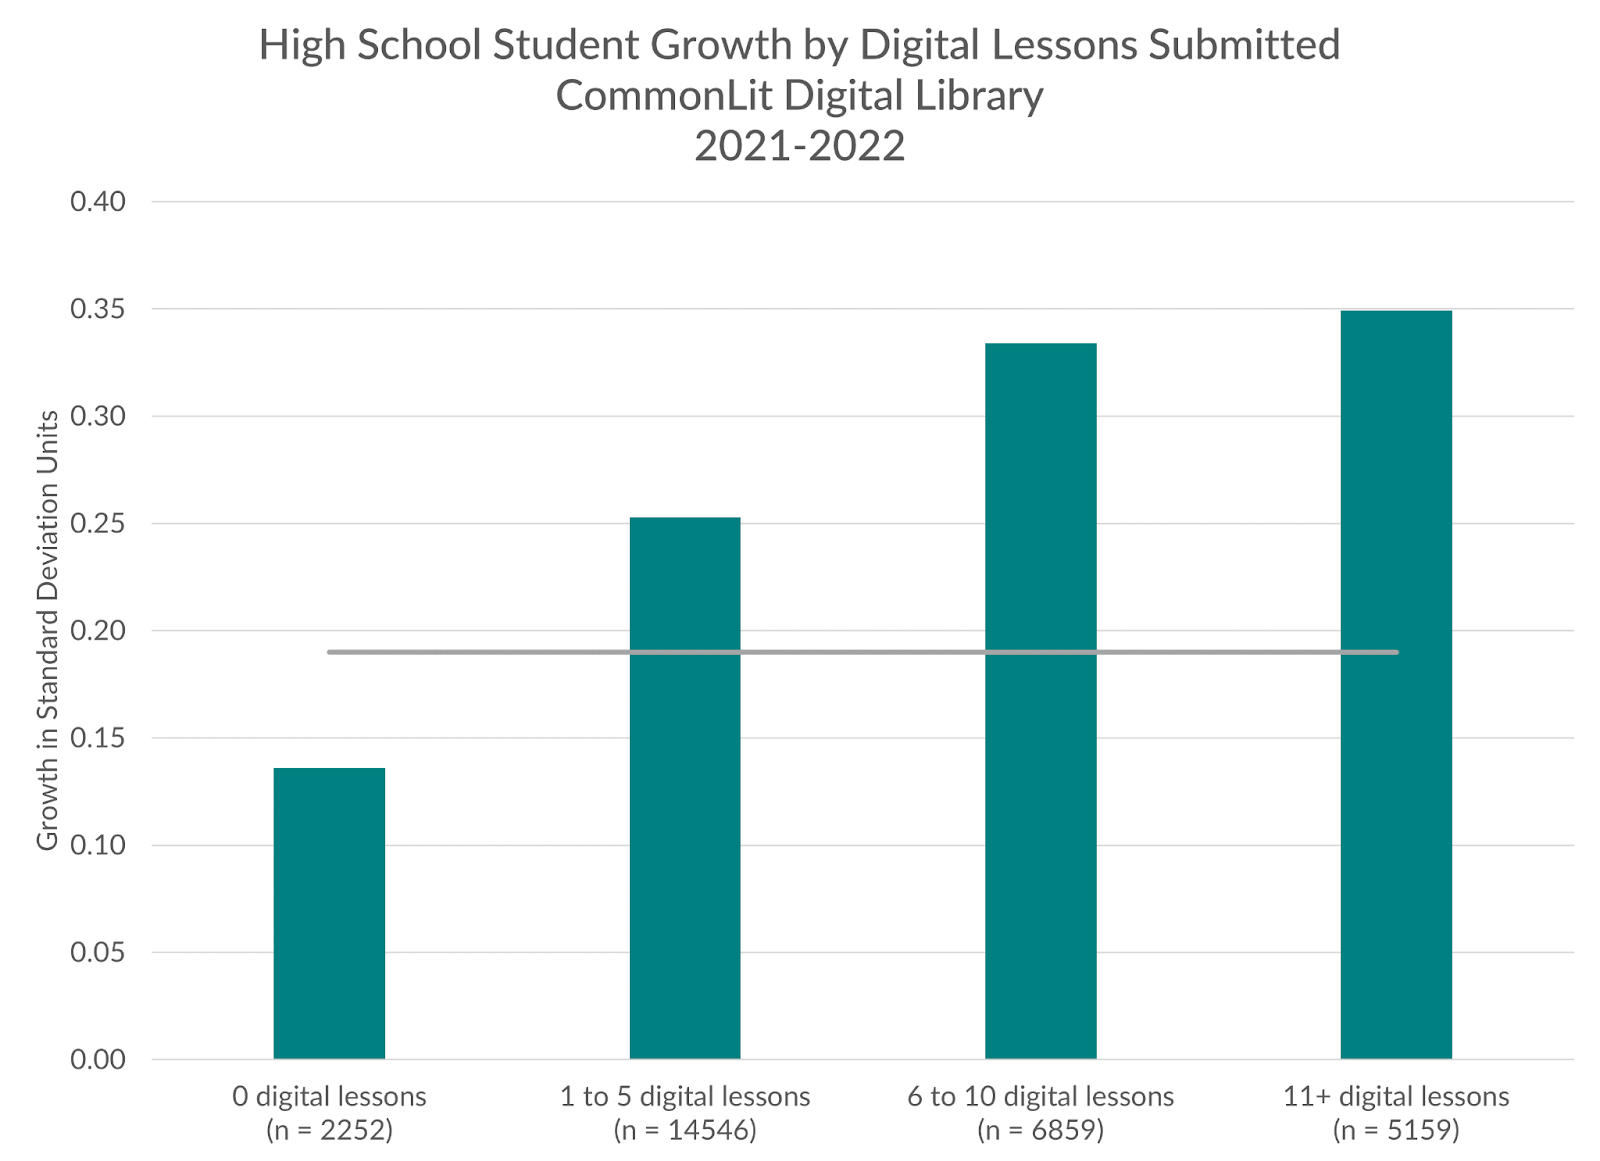 Bar graph showing high school student growth by digital lessons submitted in the CommonLit digital library